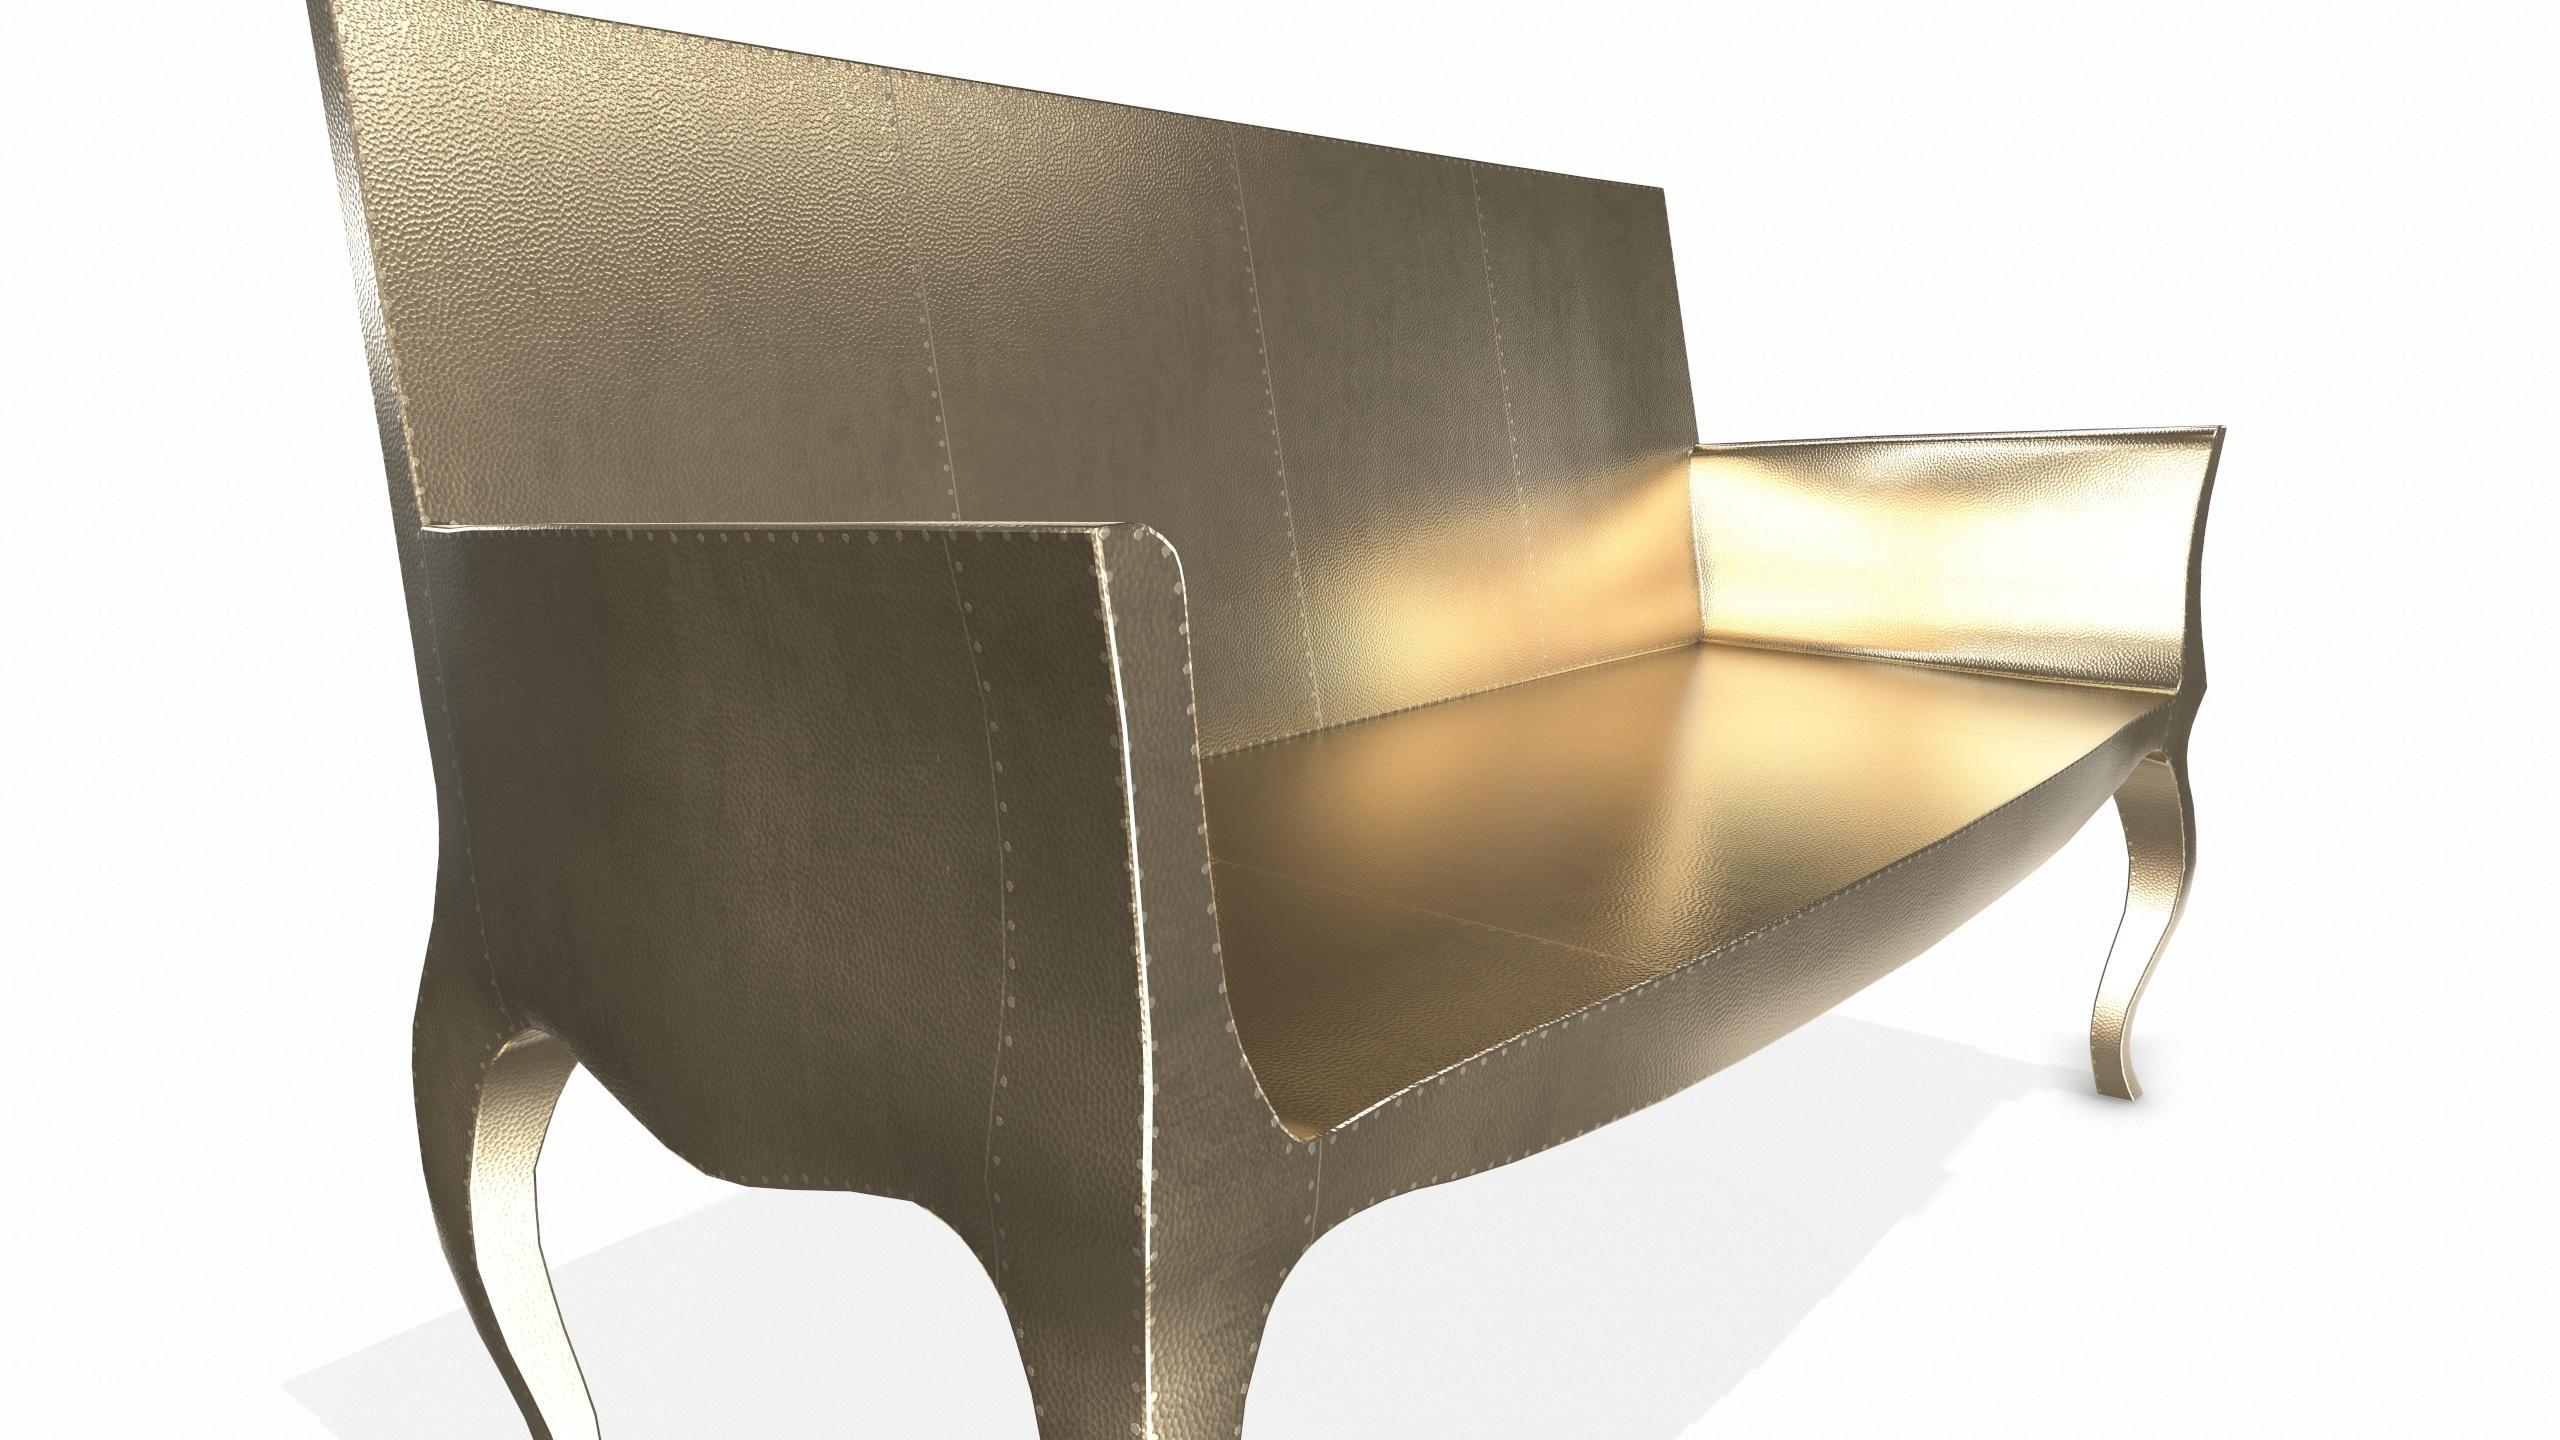 Metal Louise Settee Art Deco Lounge Chairs in Mid. Hammered Brass by Paul Mathieu For Sale